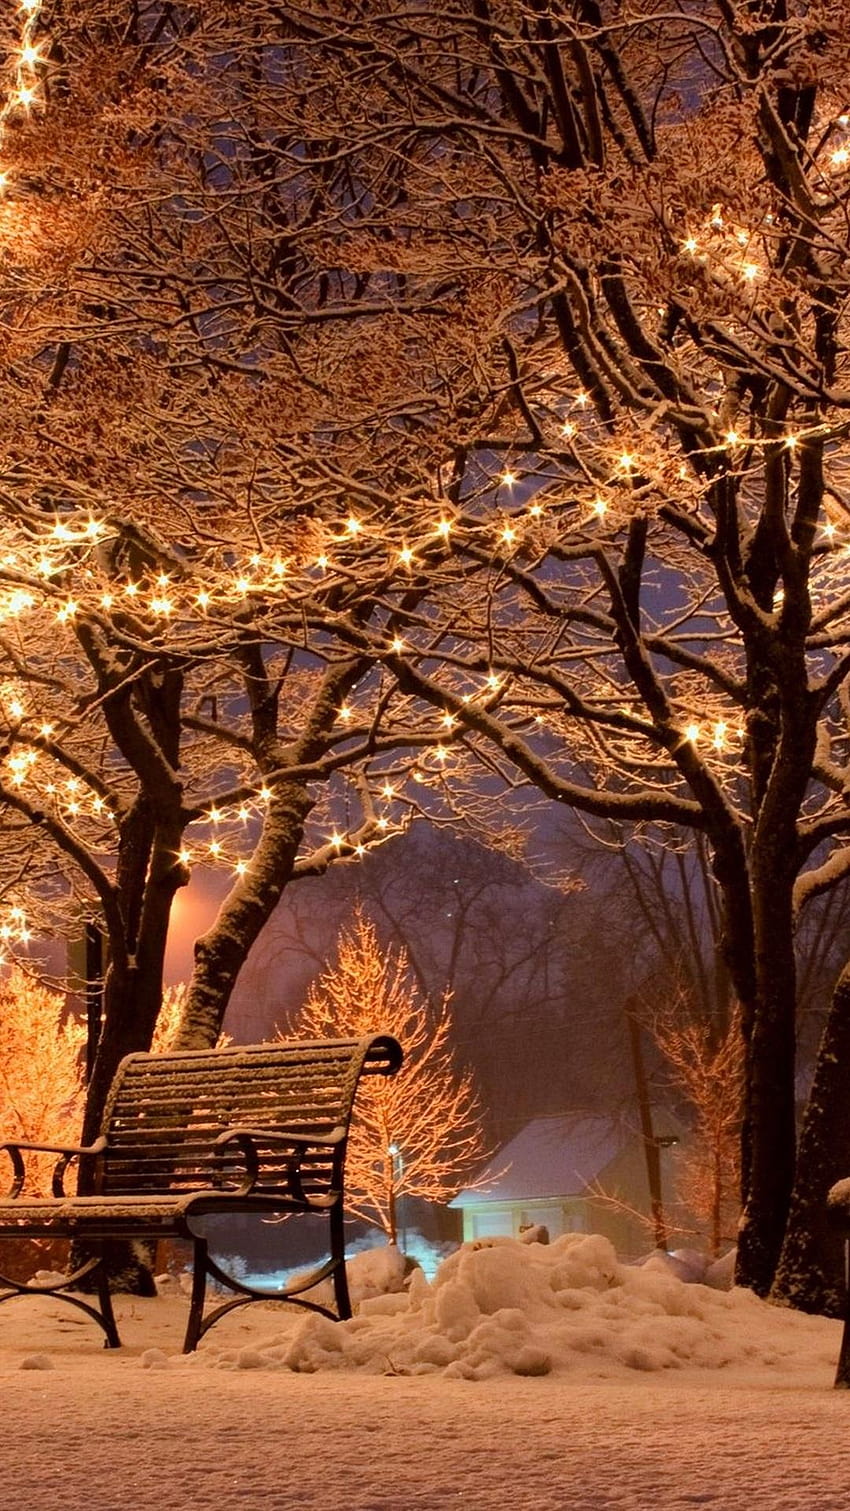 50 Gorgeous Winter Wallpaper Downloads For iPhone FREE